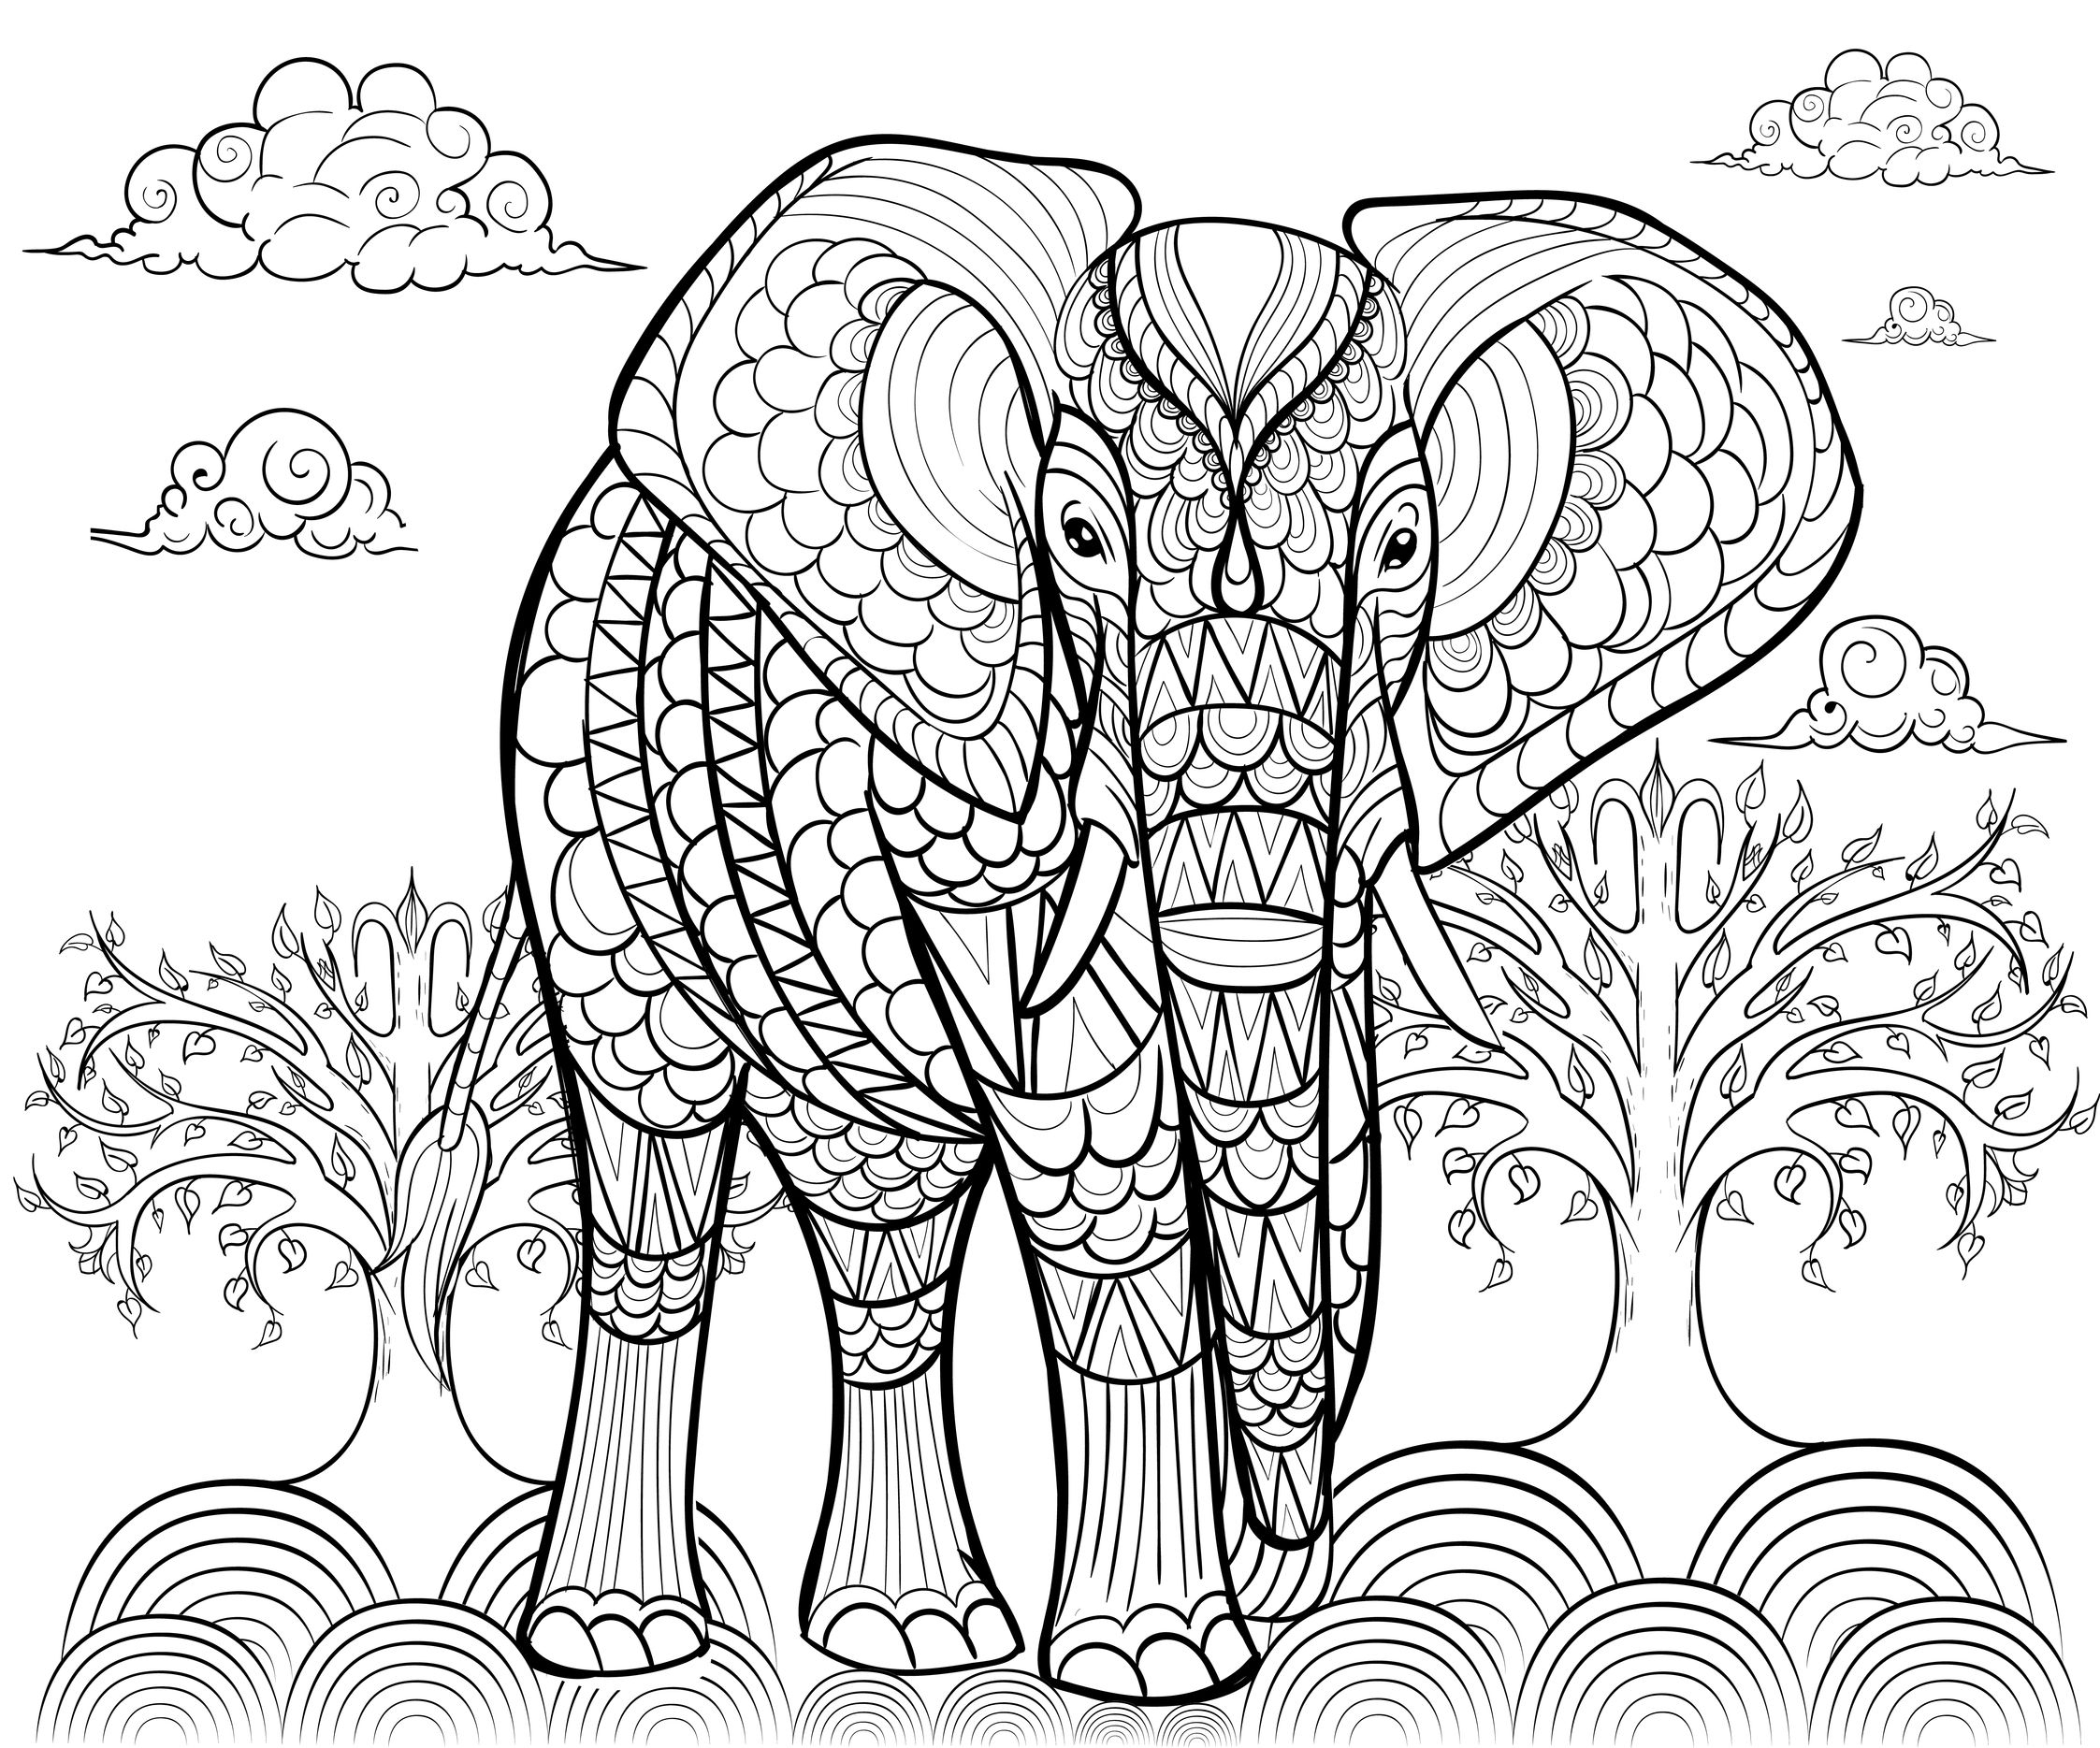 Giant Coloring Pages For Adults Elephant Alfadanz Elephants Adult Coloring Pages